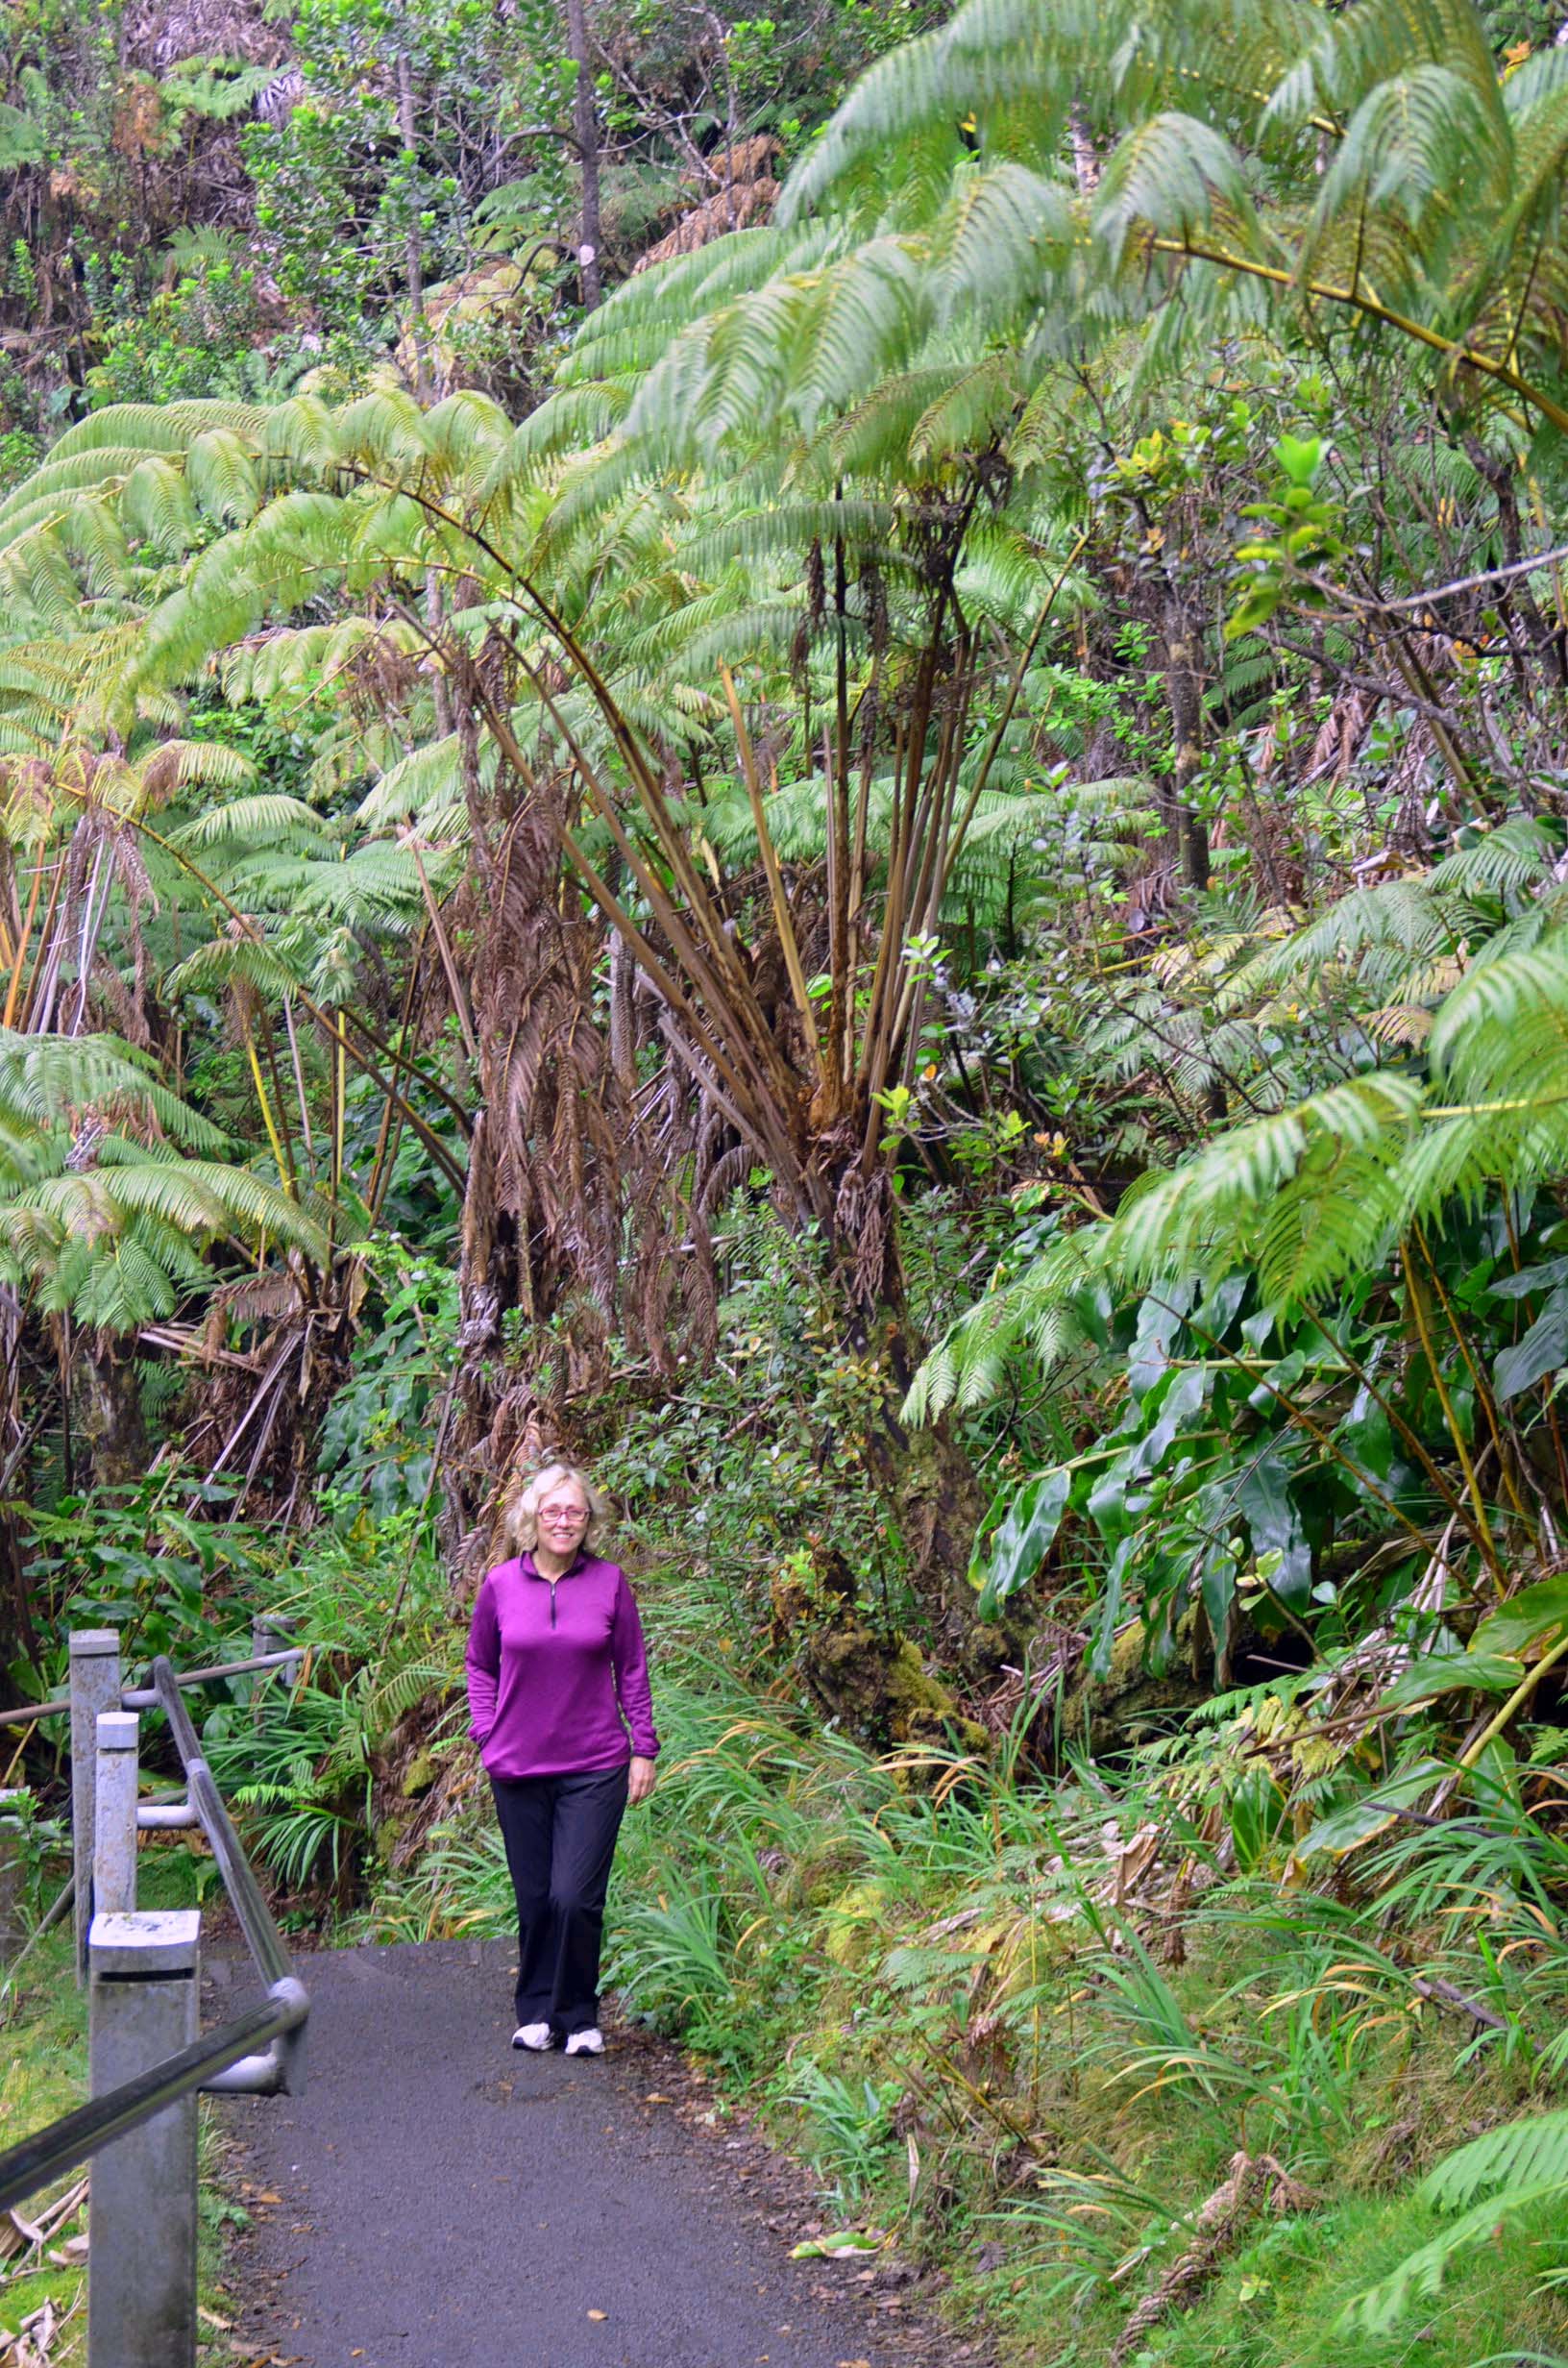 Amidst the Giant Ferns